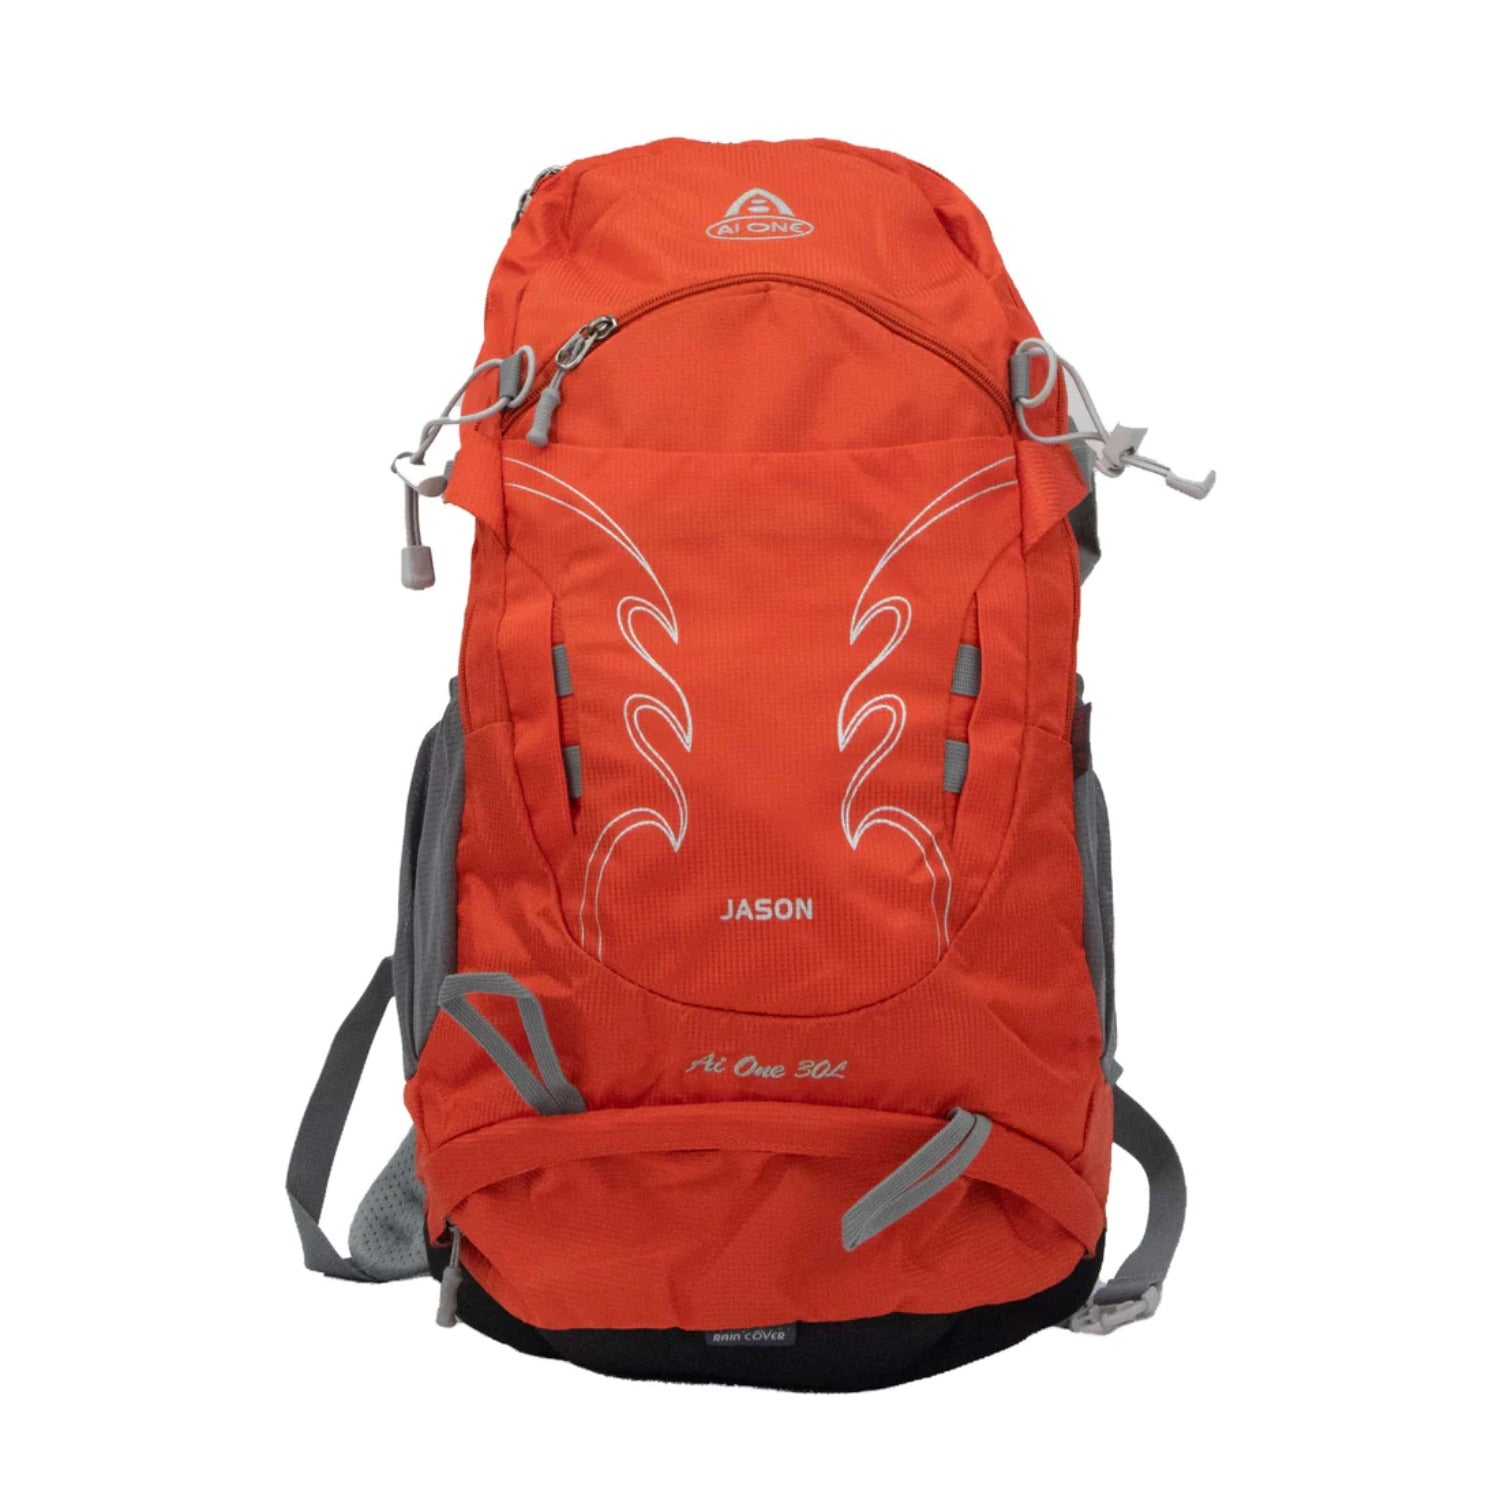 Buy Pro Trekking Backpack 25 Ltr at Gokyo Outdoor Clothing & Gear